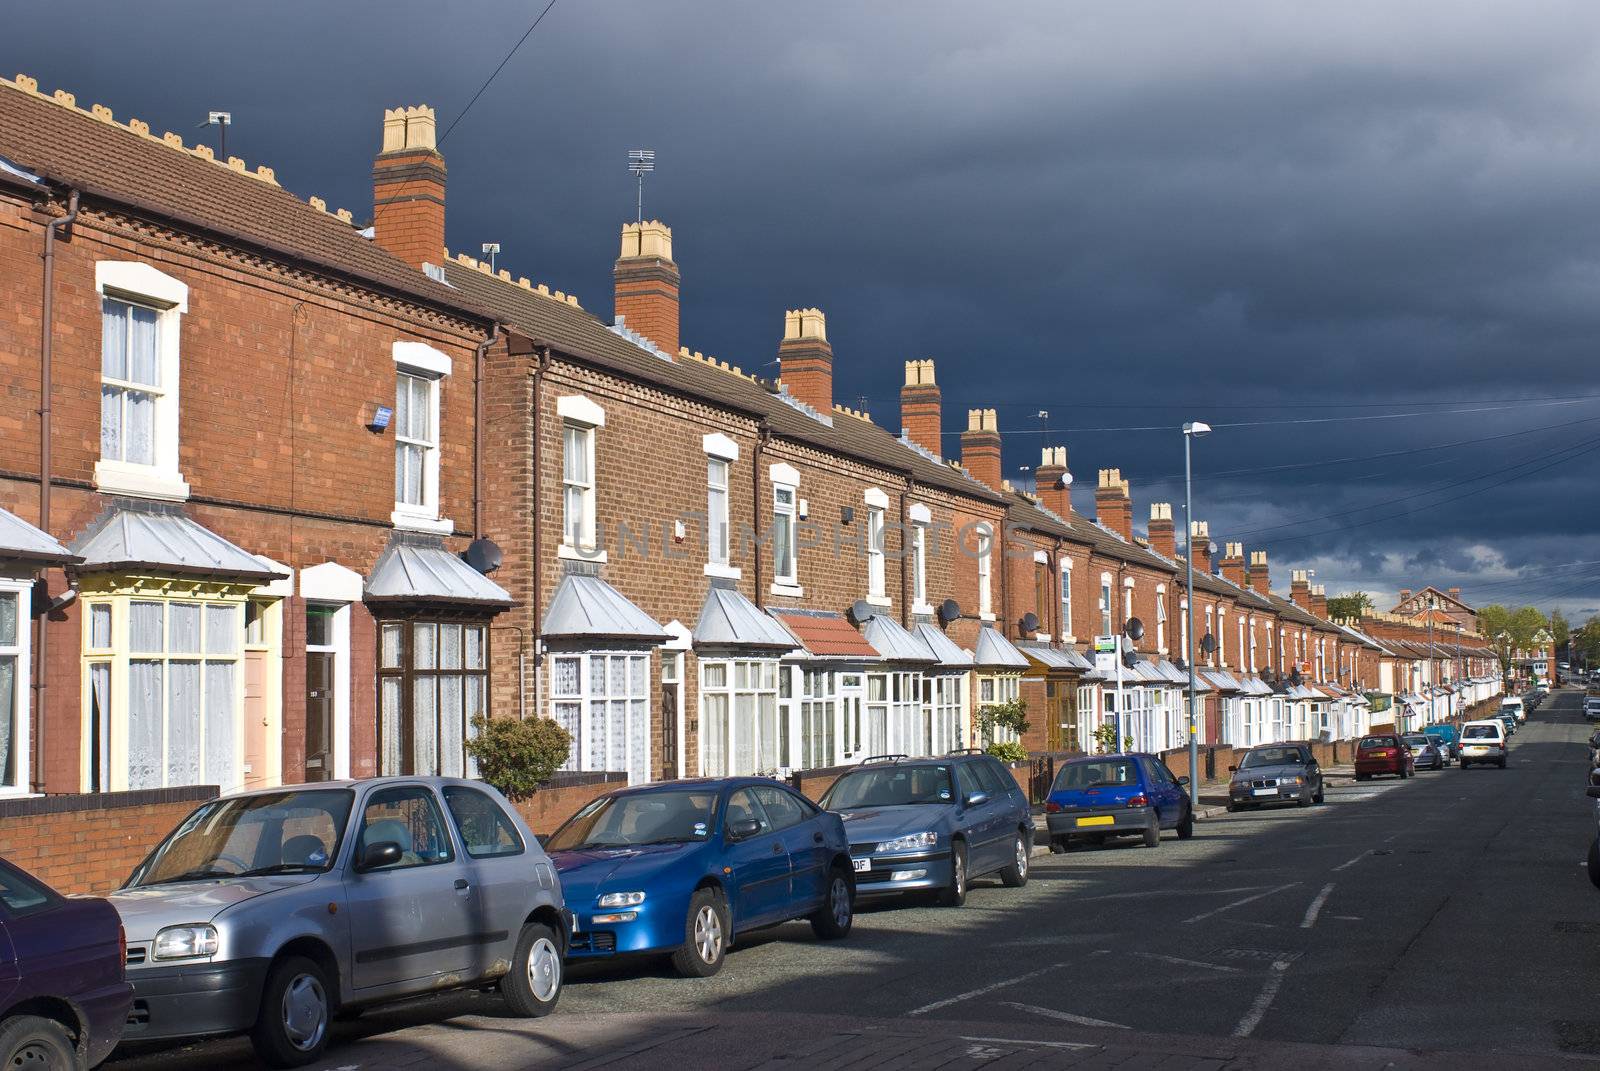 Old road with town hauses in Birmingham United Kingdom